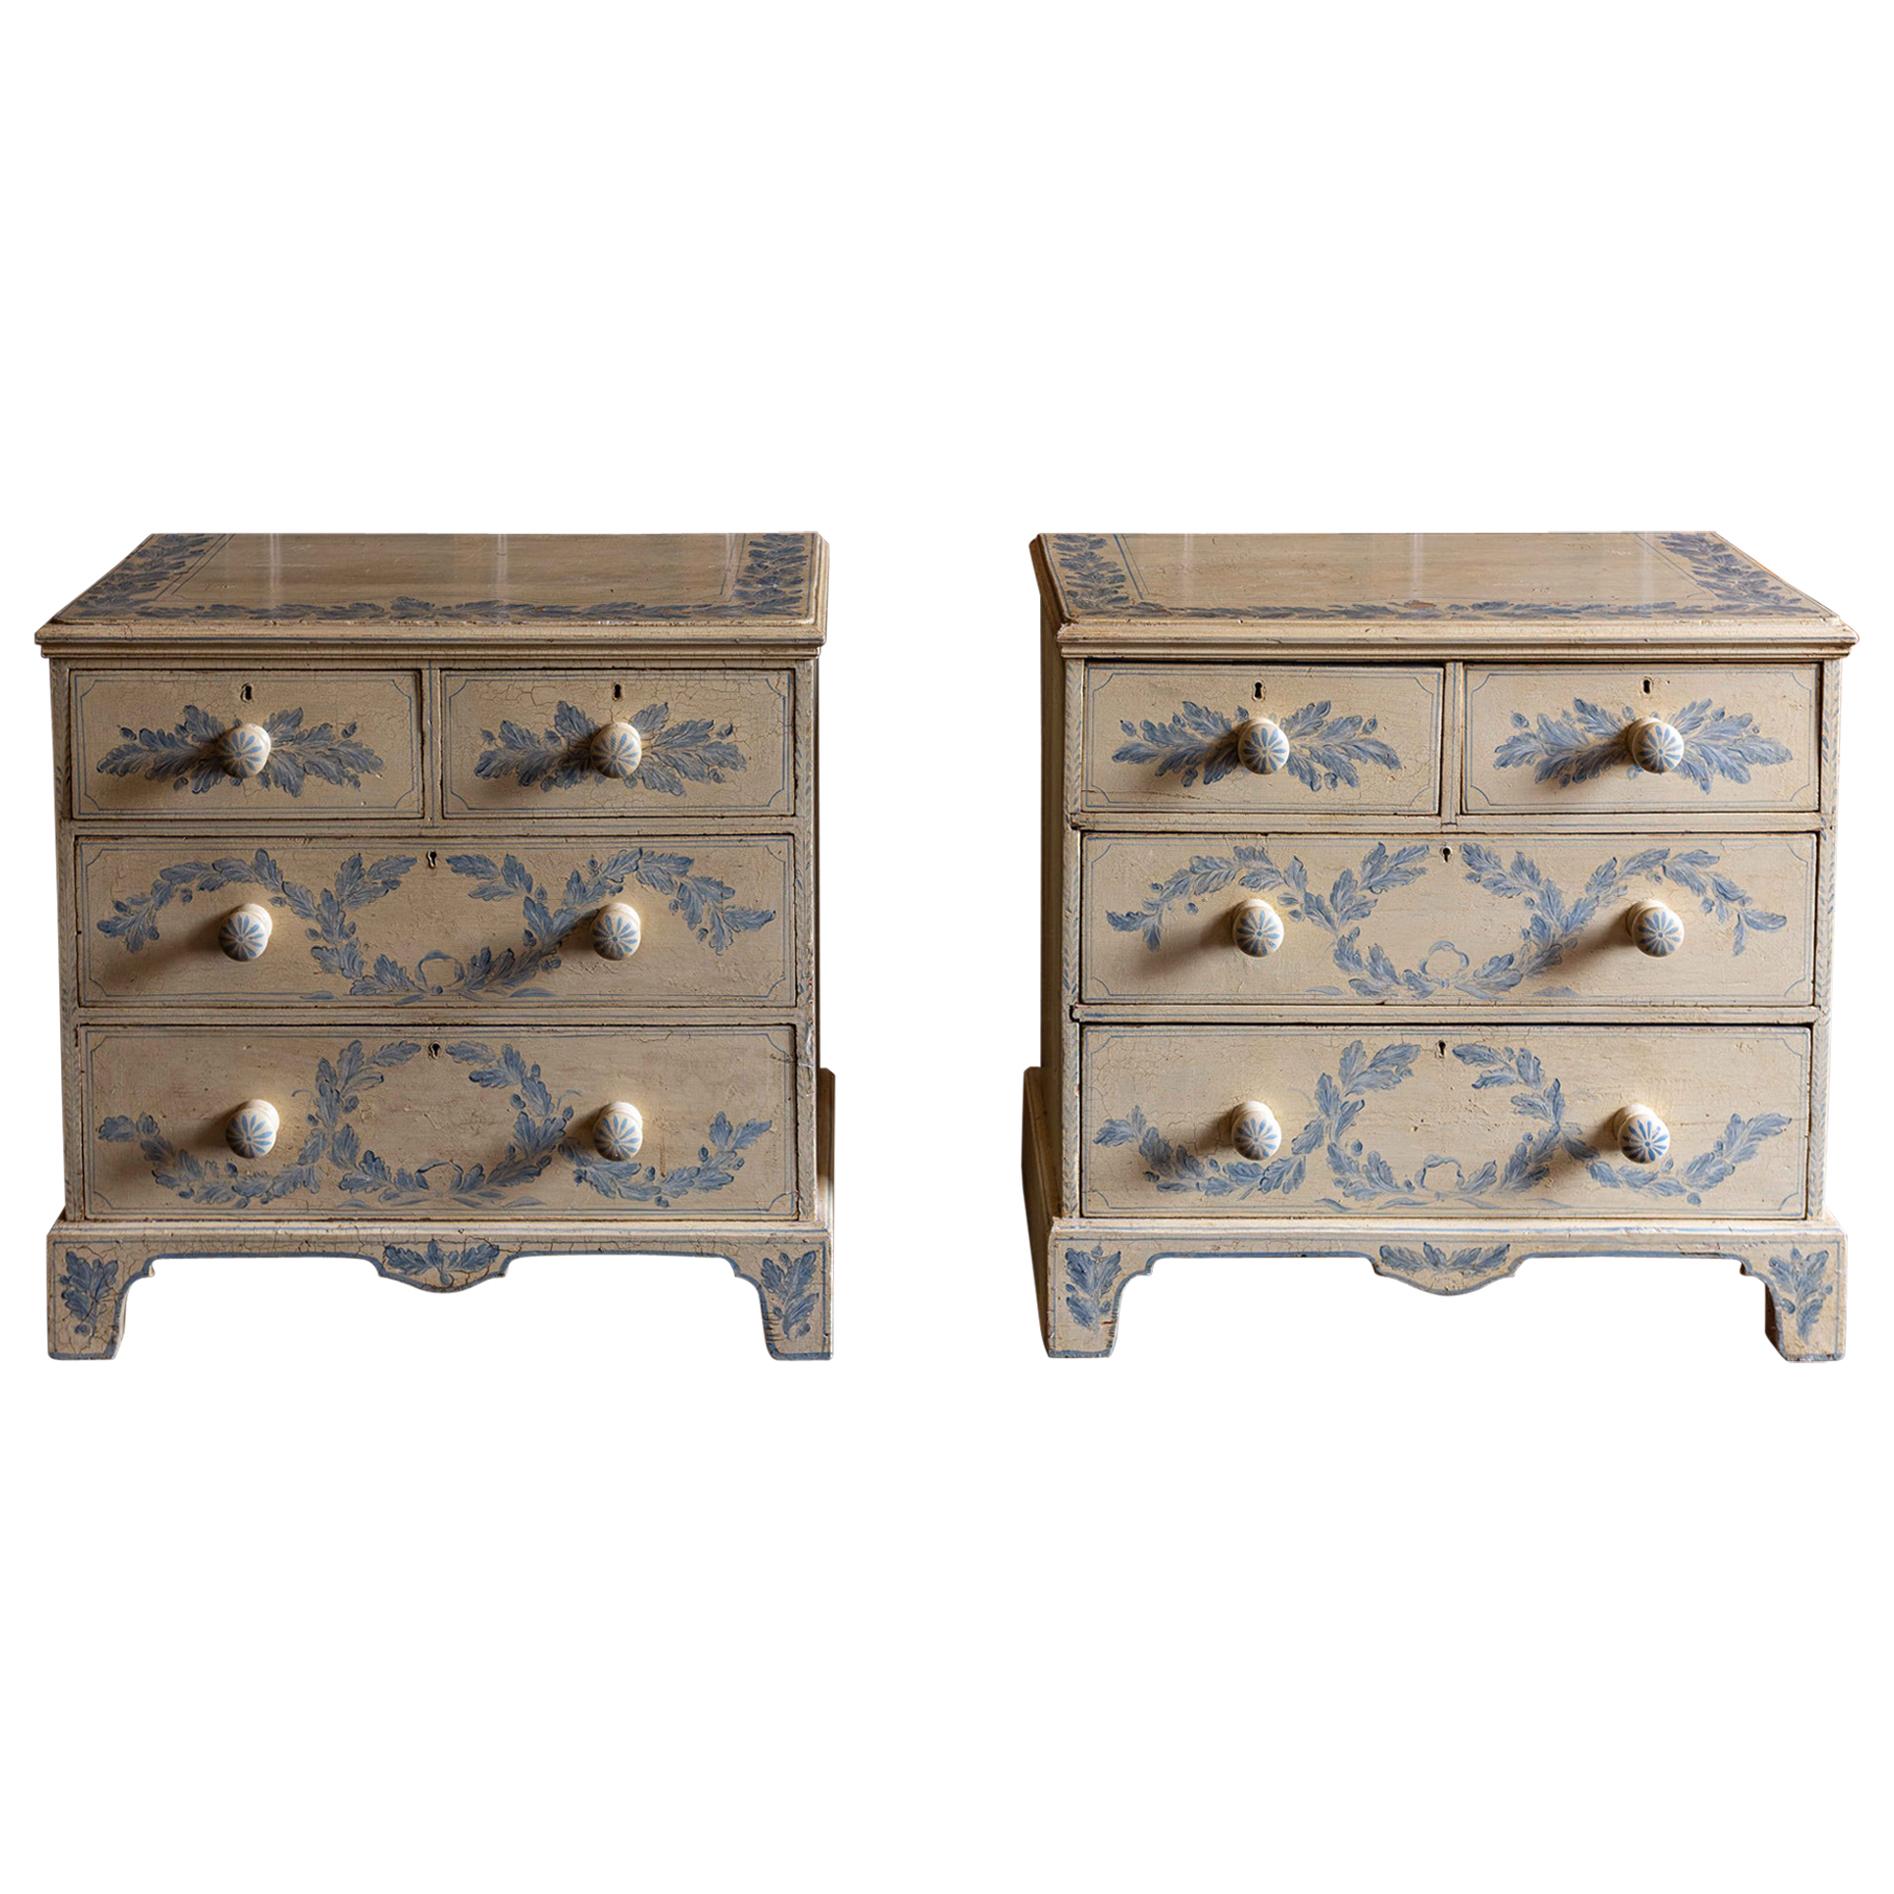 19th Century English Pair of Painted Chest of Drawers